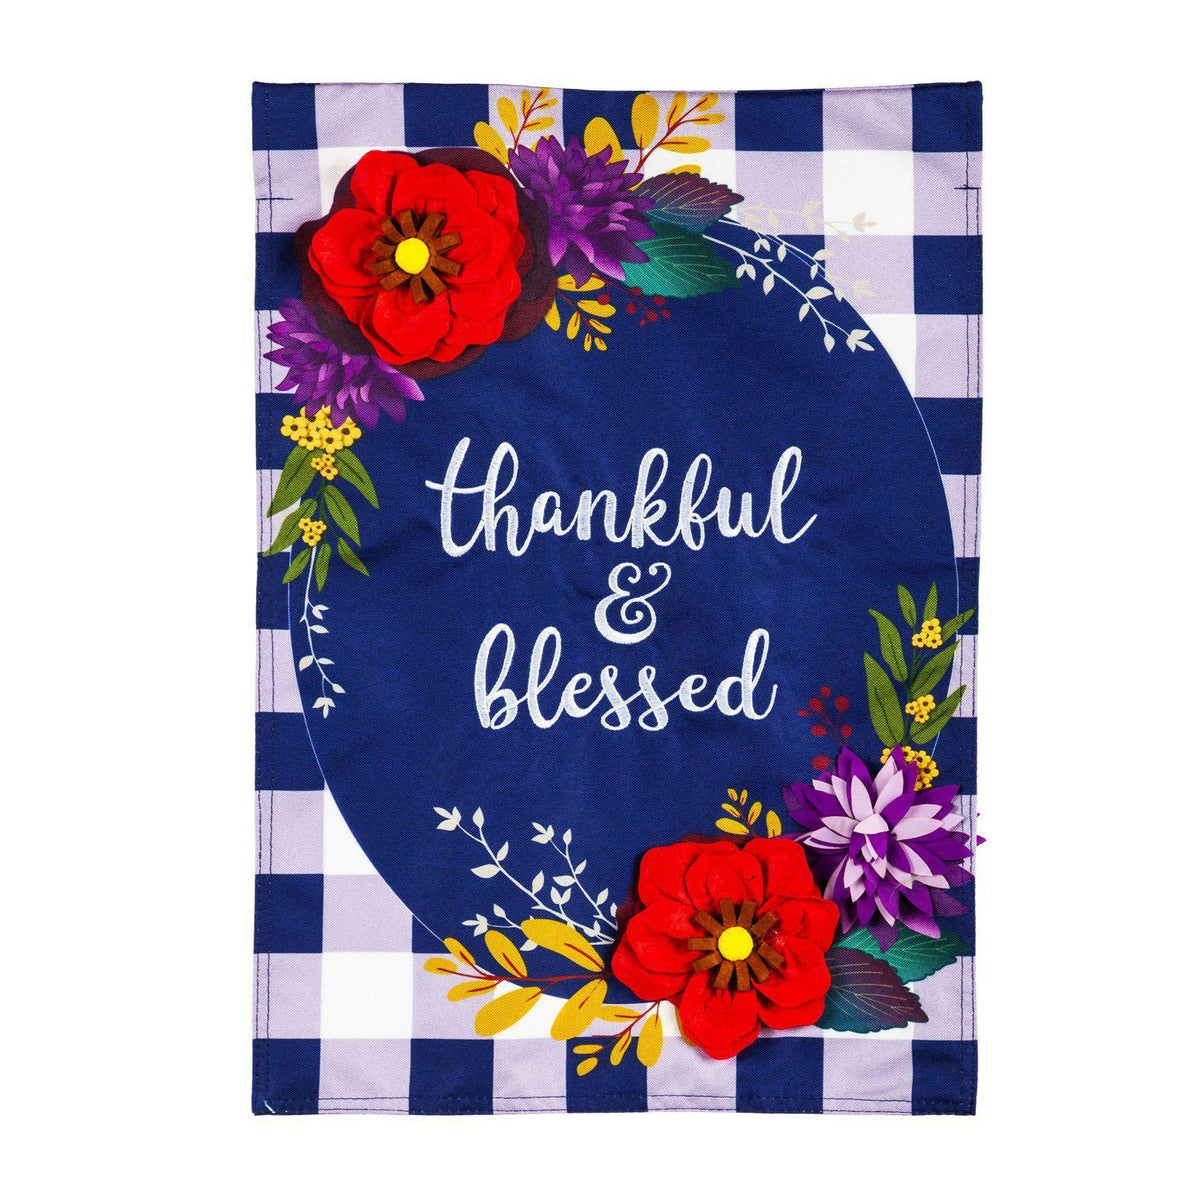 The Fall Floral Check garden flag features a red floral and navy checked background with the words "Thankful and Blessed".